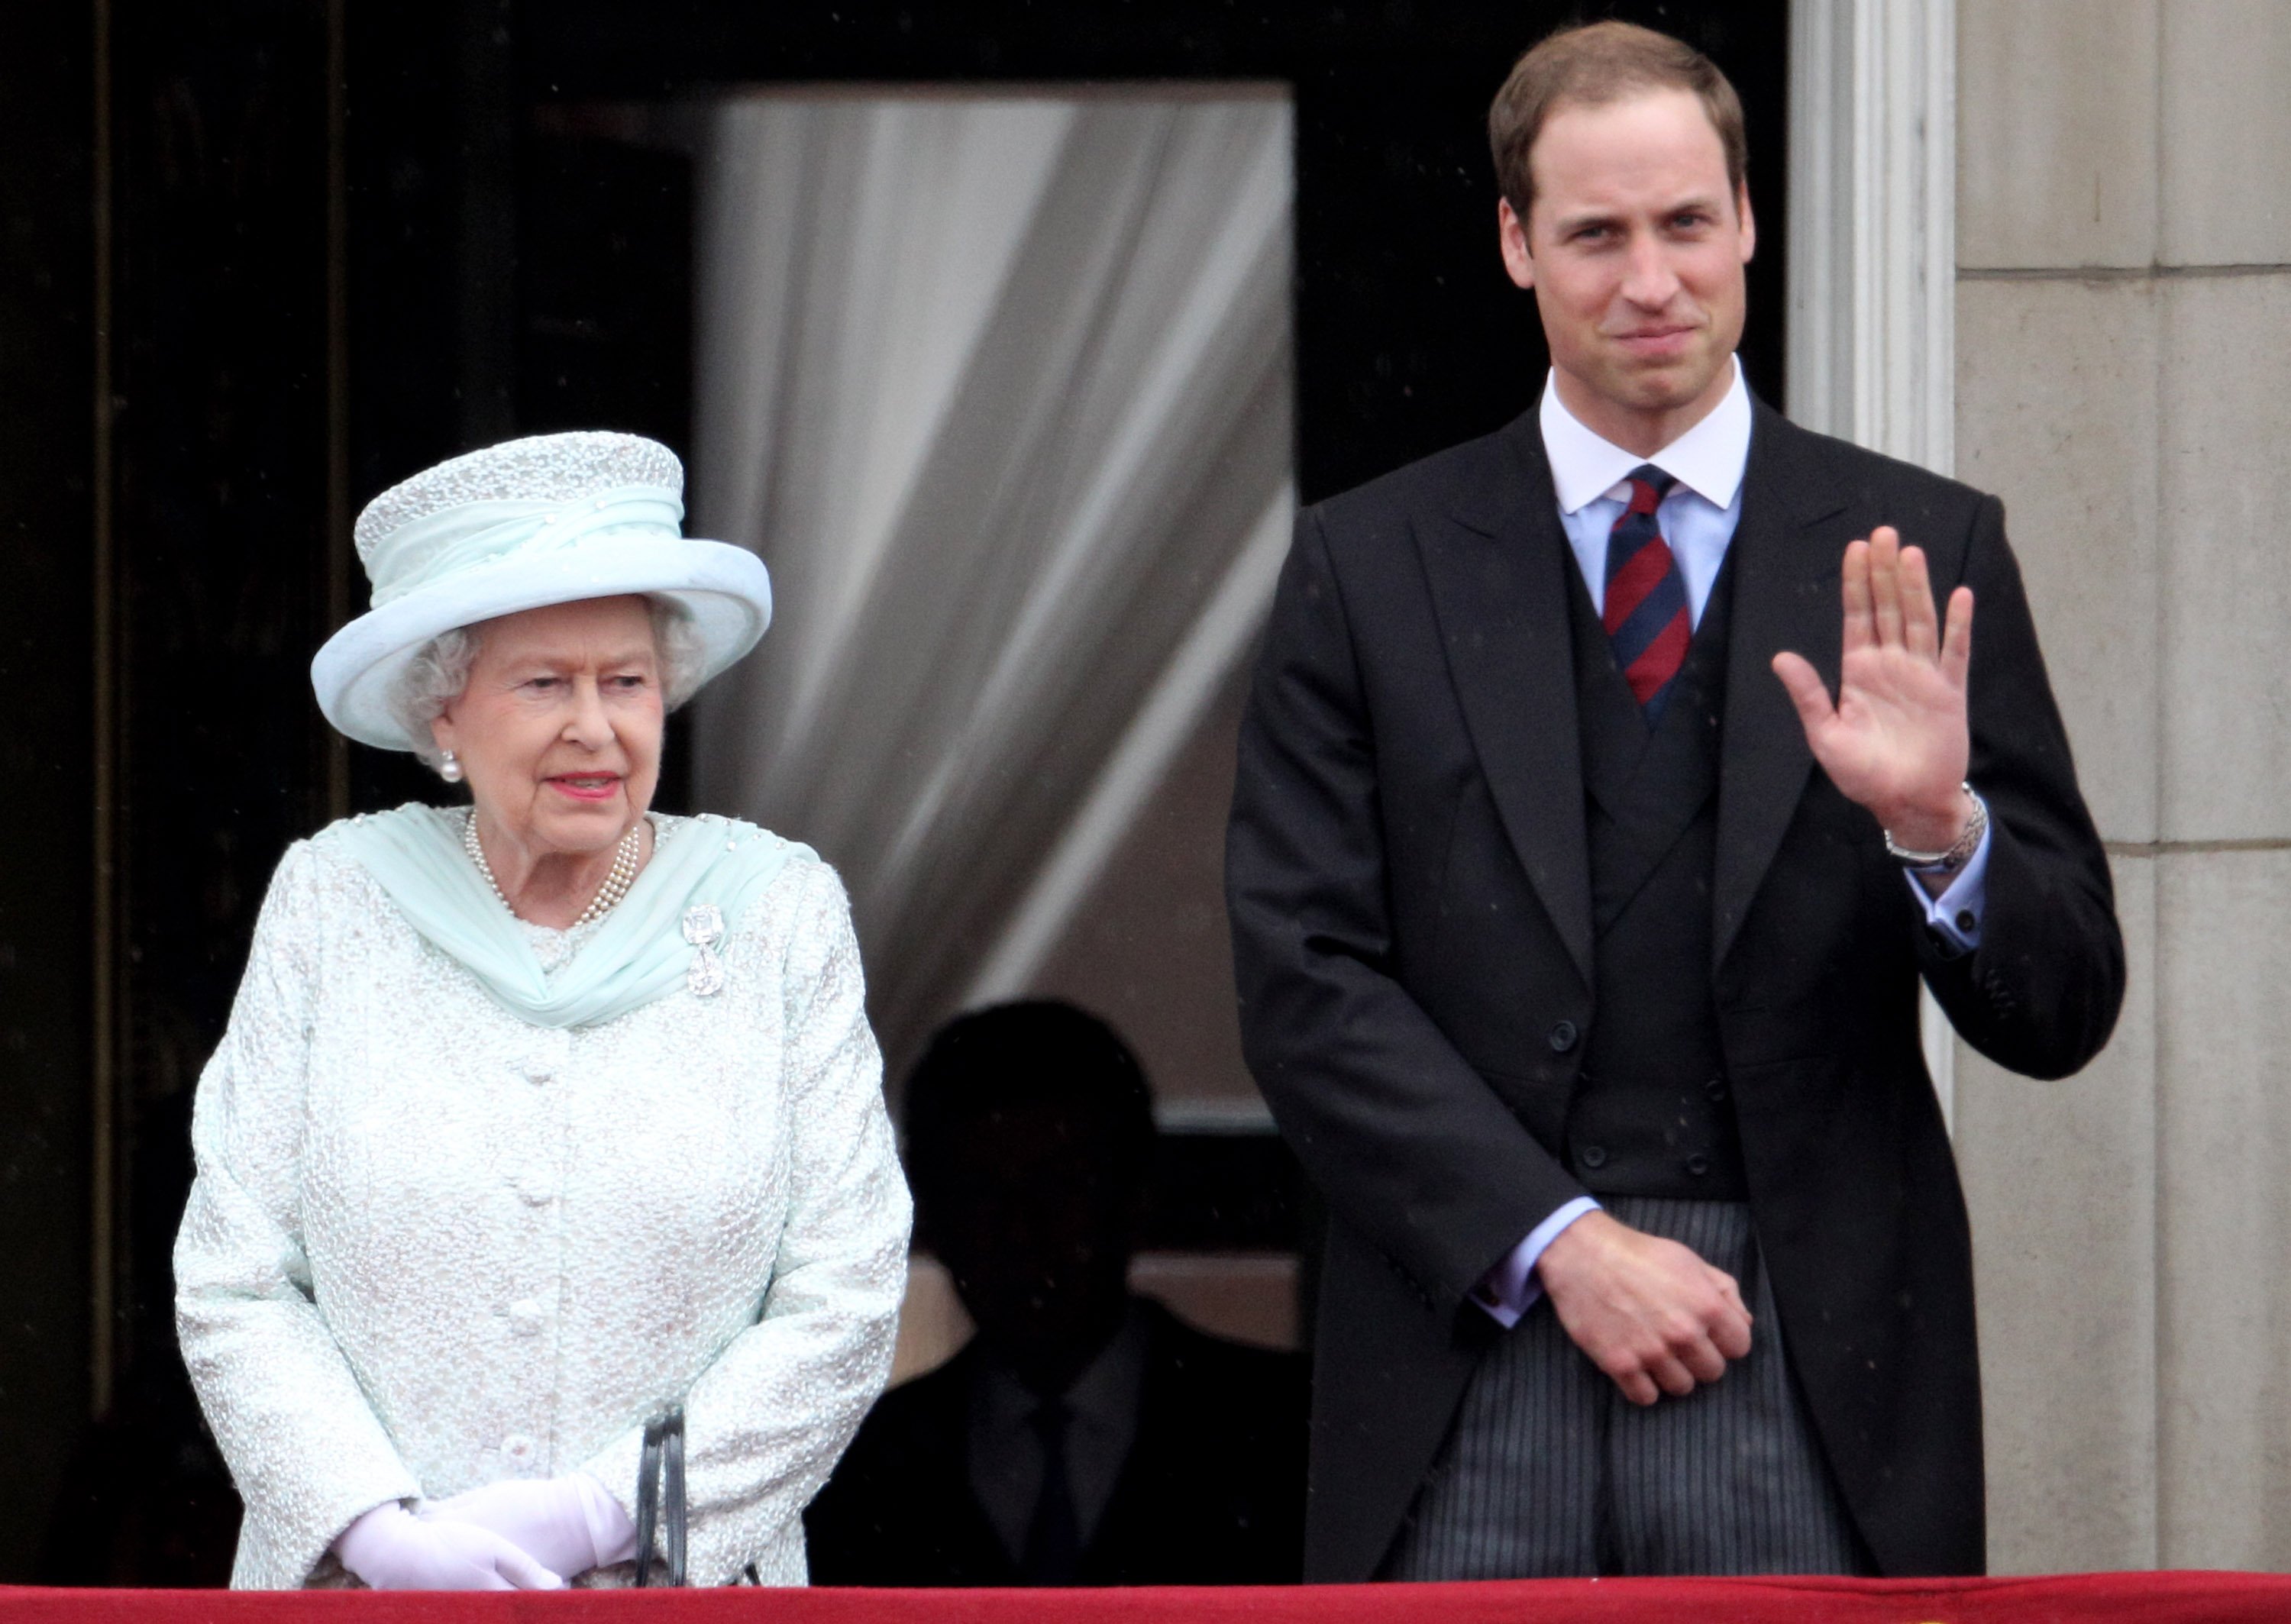 Queen Elizabeth II and Prince William standing on the balcony of Buckingham Palace together after the service of thanksgiving